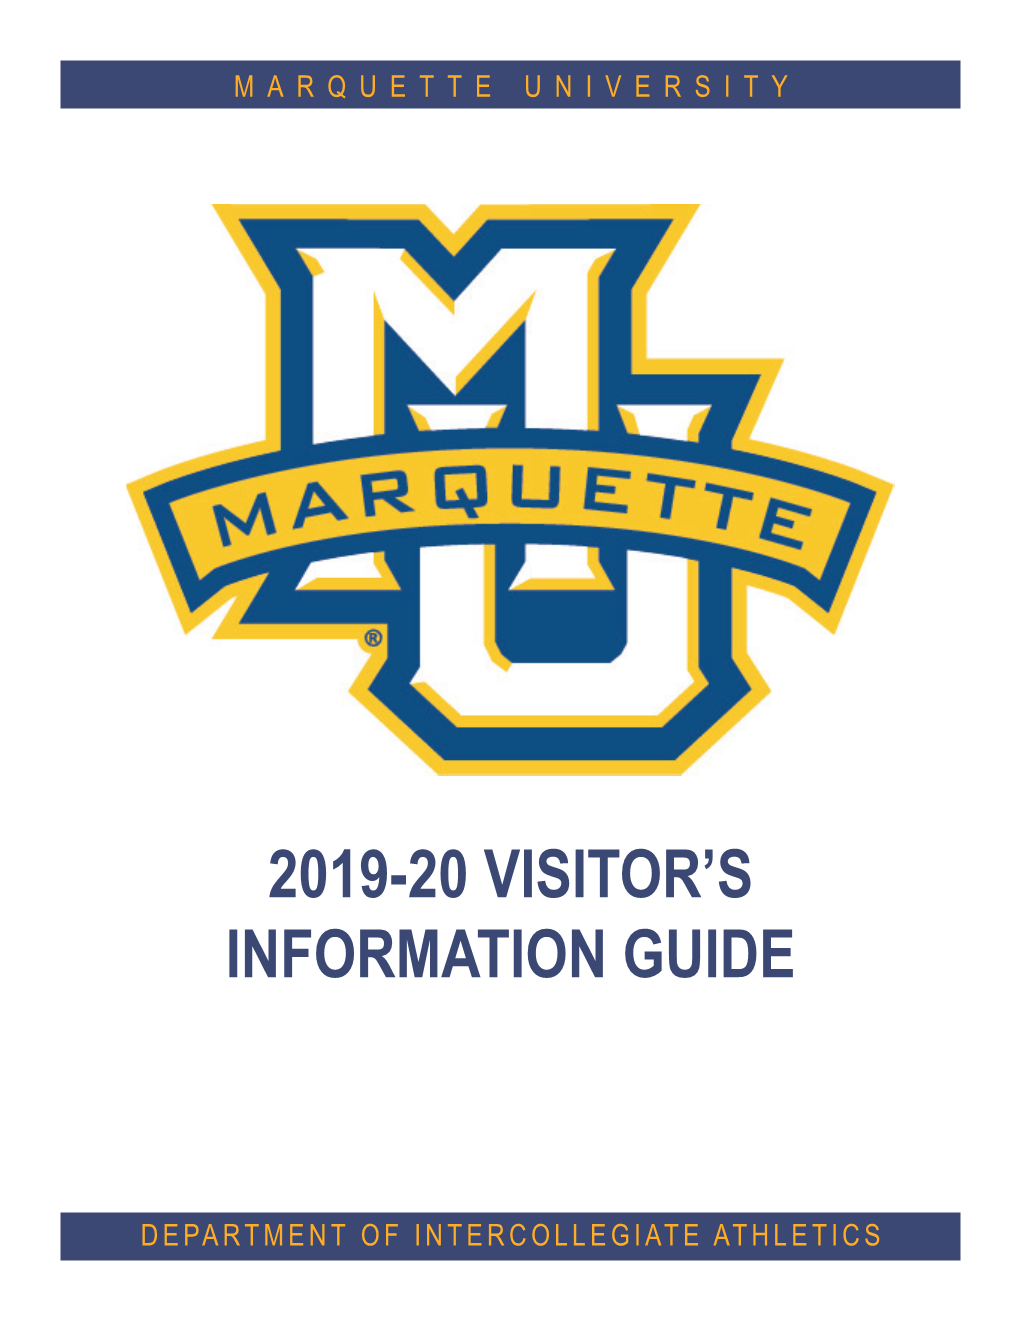 2019-20 Visitor's Information Guide